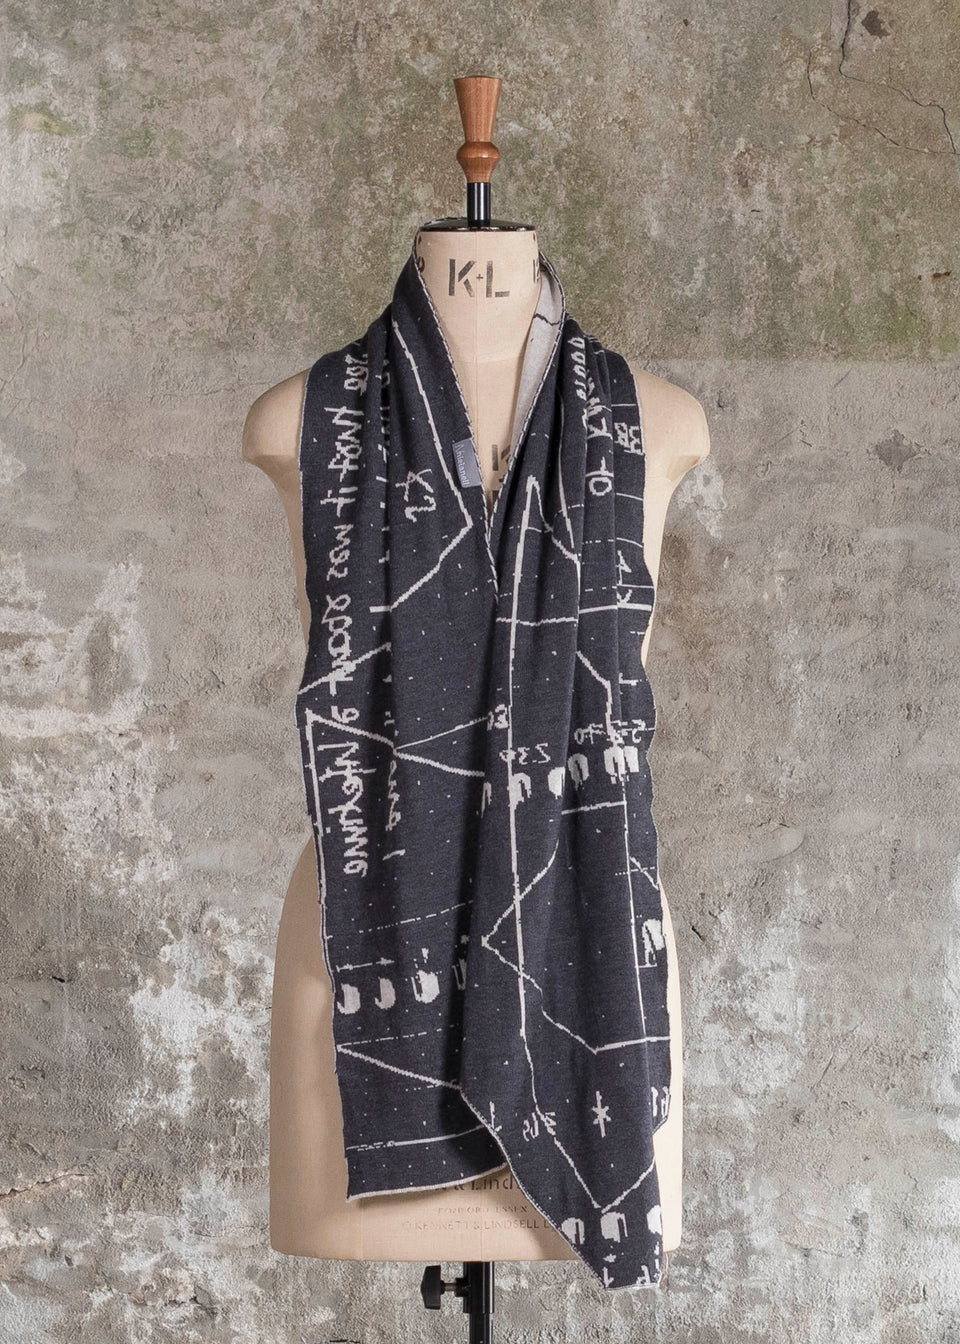 Knitted Byre cravat. Abstract, graphic design in an asymmetric shape. Shown in Charcoal and stone white